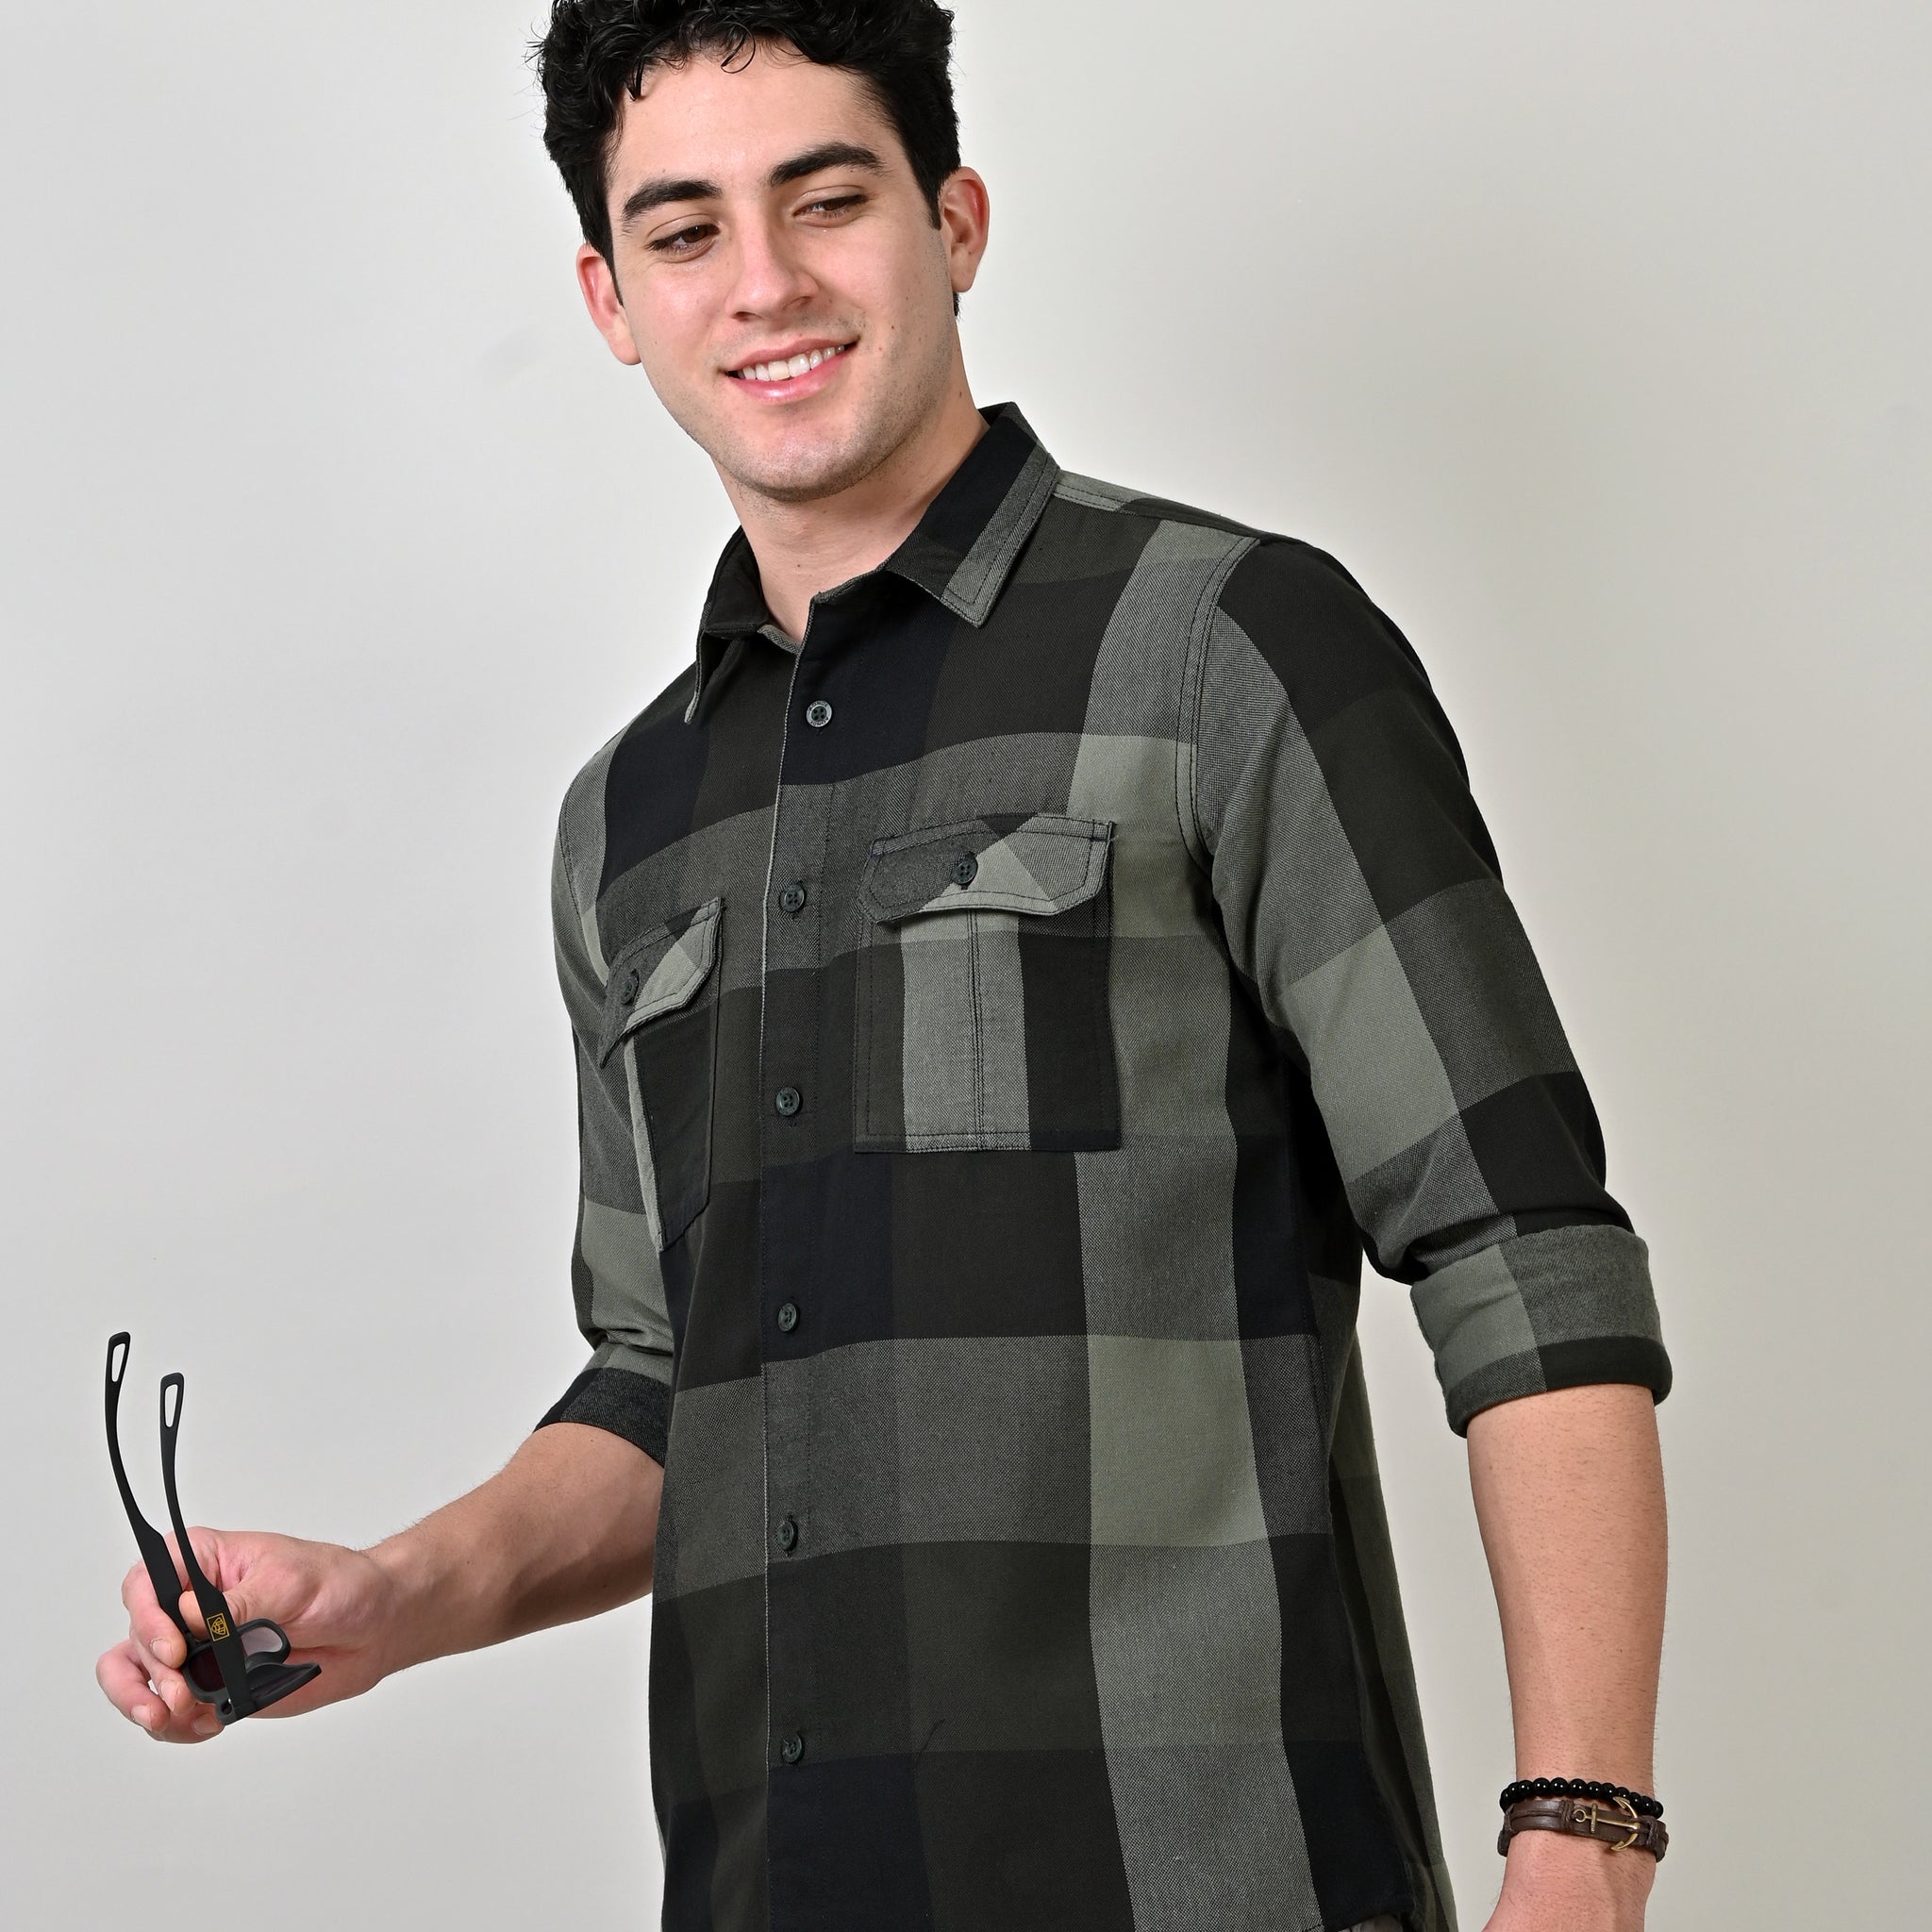 Oxford Brushed Green Checkered Shirt